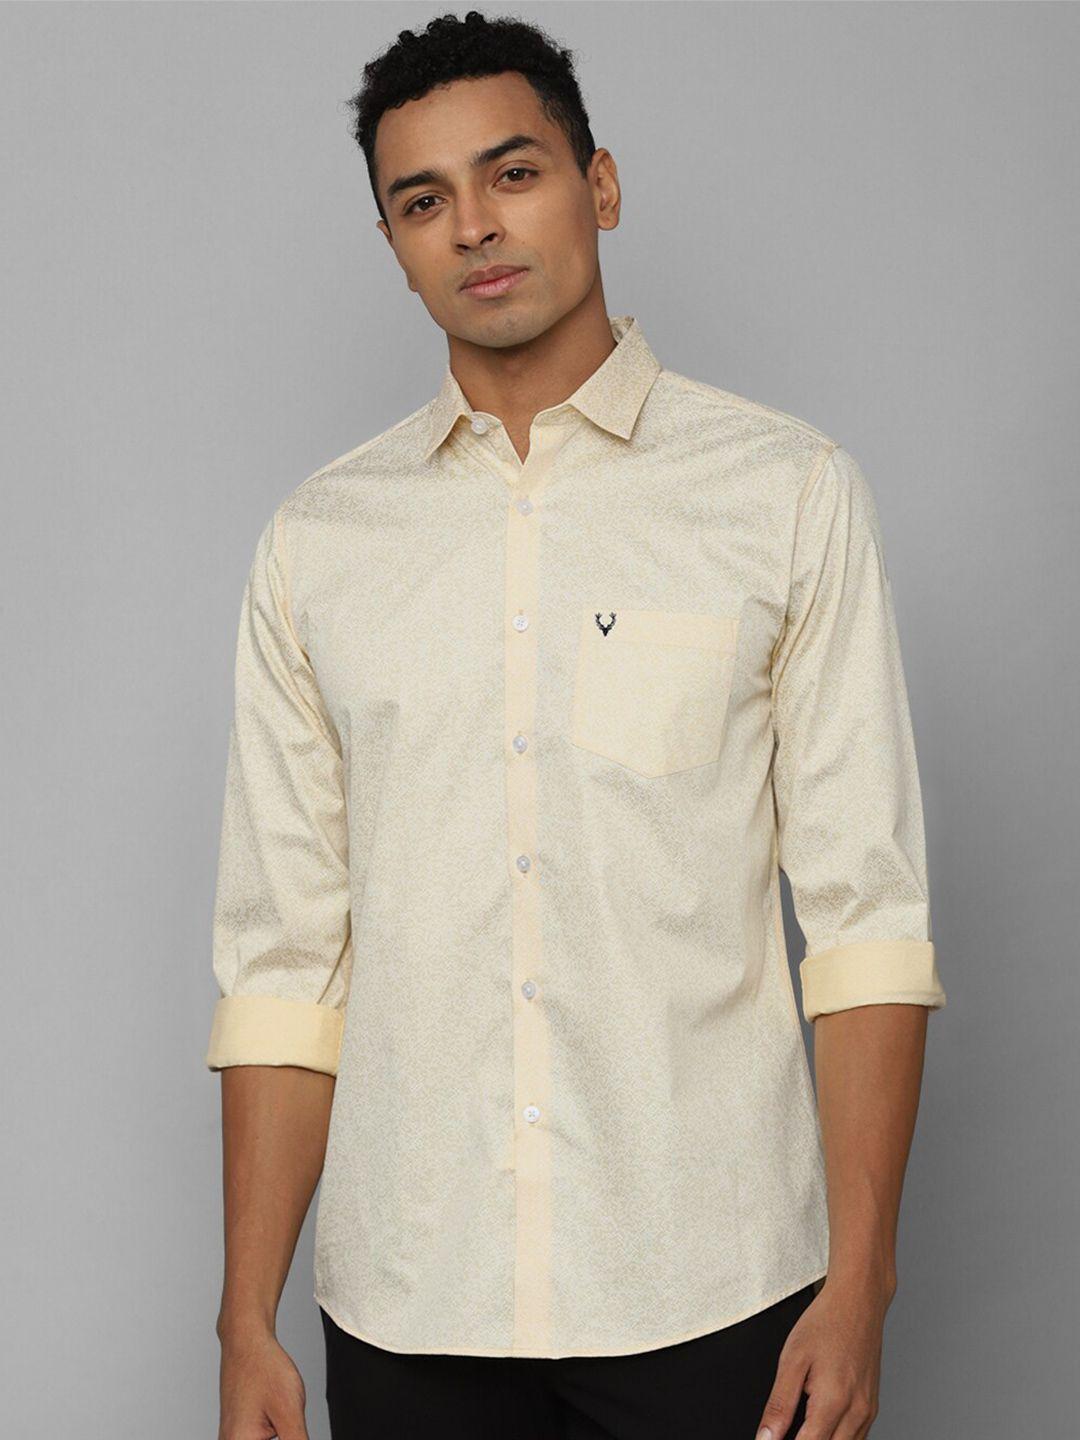 Allen Solly Slim Fit Geometric Printed Pure Cotton Casual Shirt